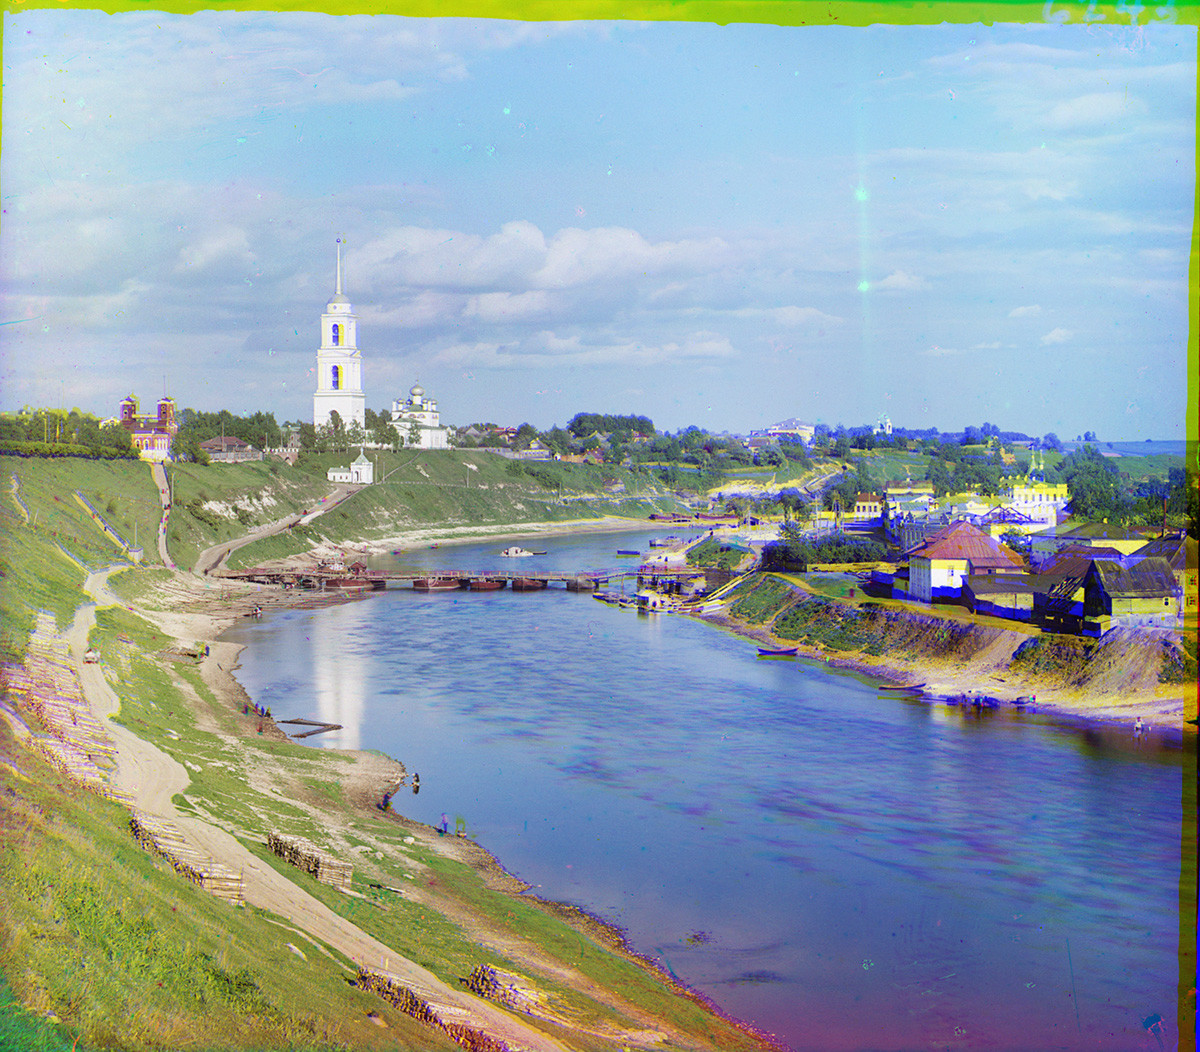 Rzhev. View east down Volga River. Left: Prince Fyodor Side with Dormition Cathedral & bell tower (all destroyed during World War II). Right: Prince Dmitry Side. Summer 1910.